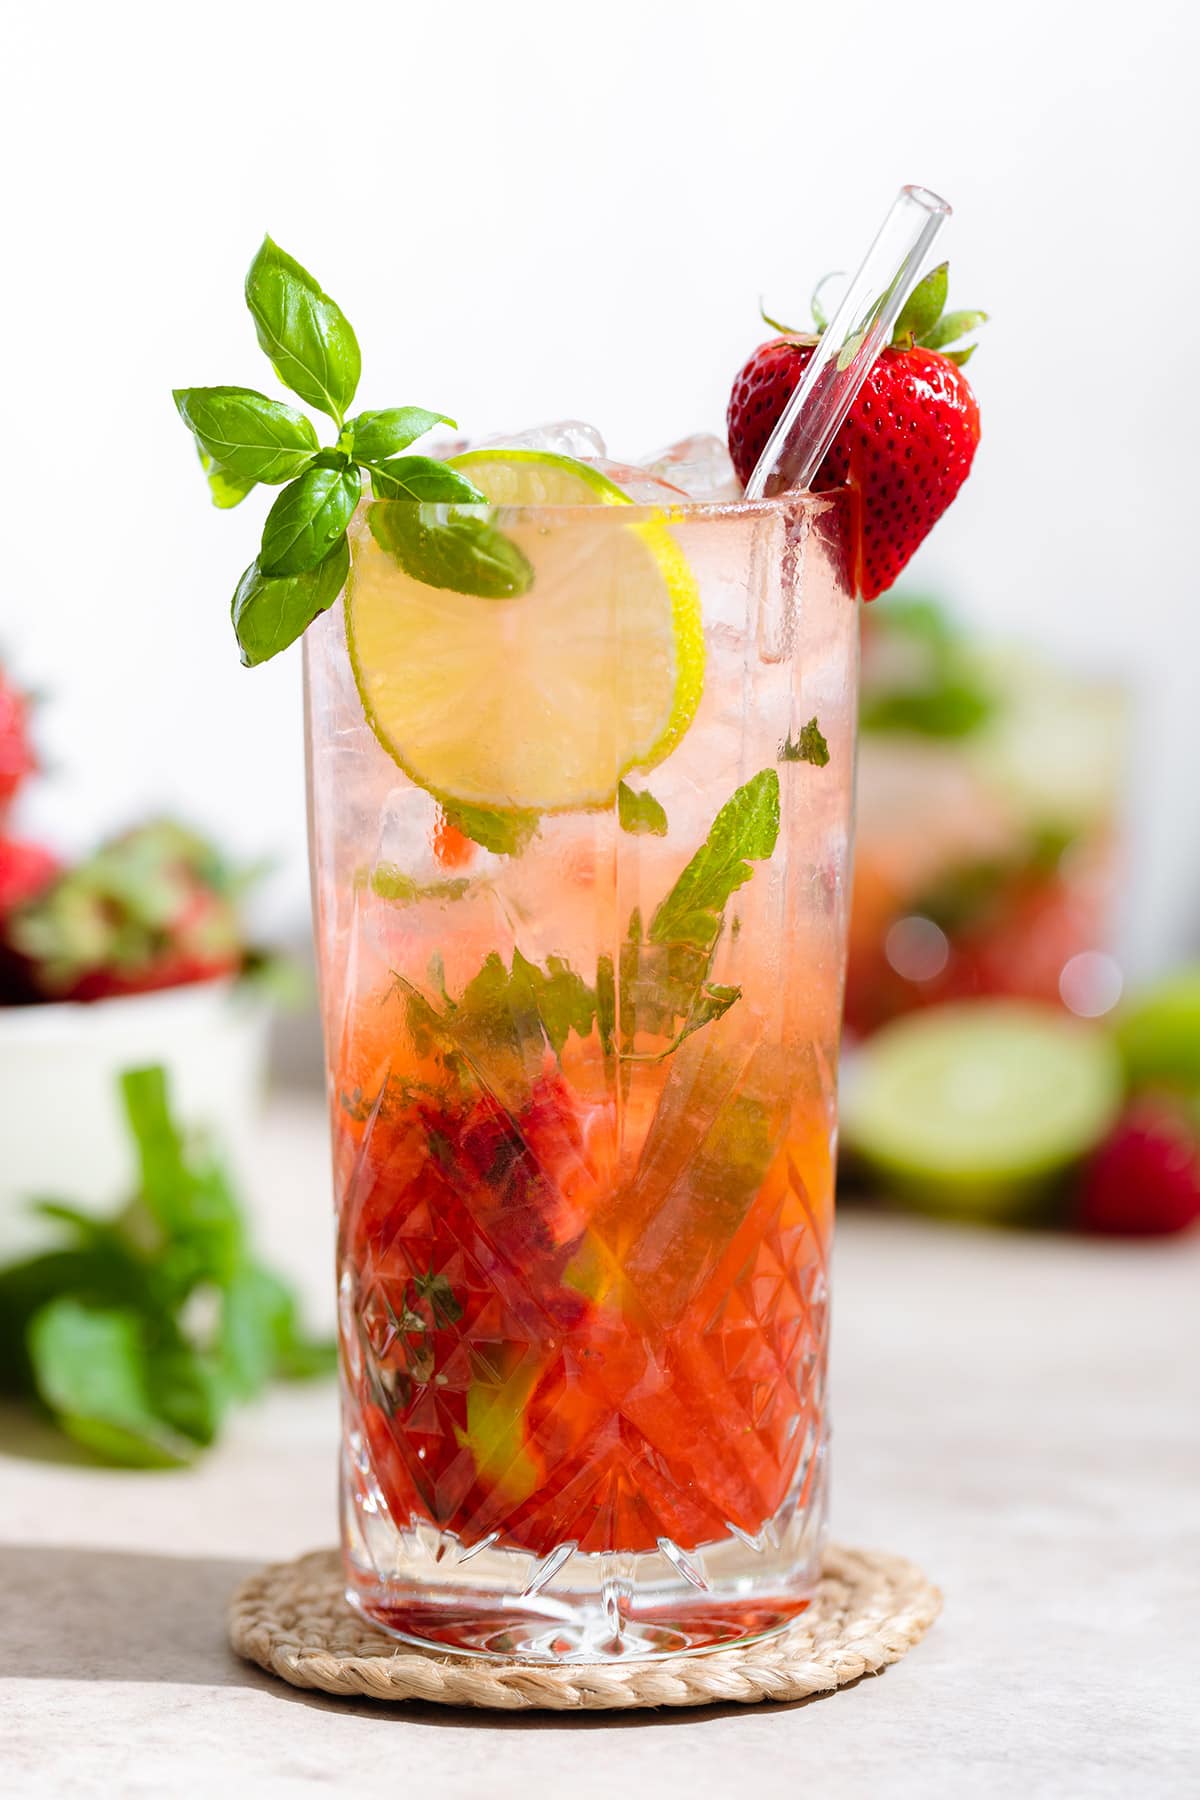 Strawberry basil mojito in a tall glass garnished with fresh basil, lime slice, and a strawberry.